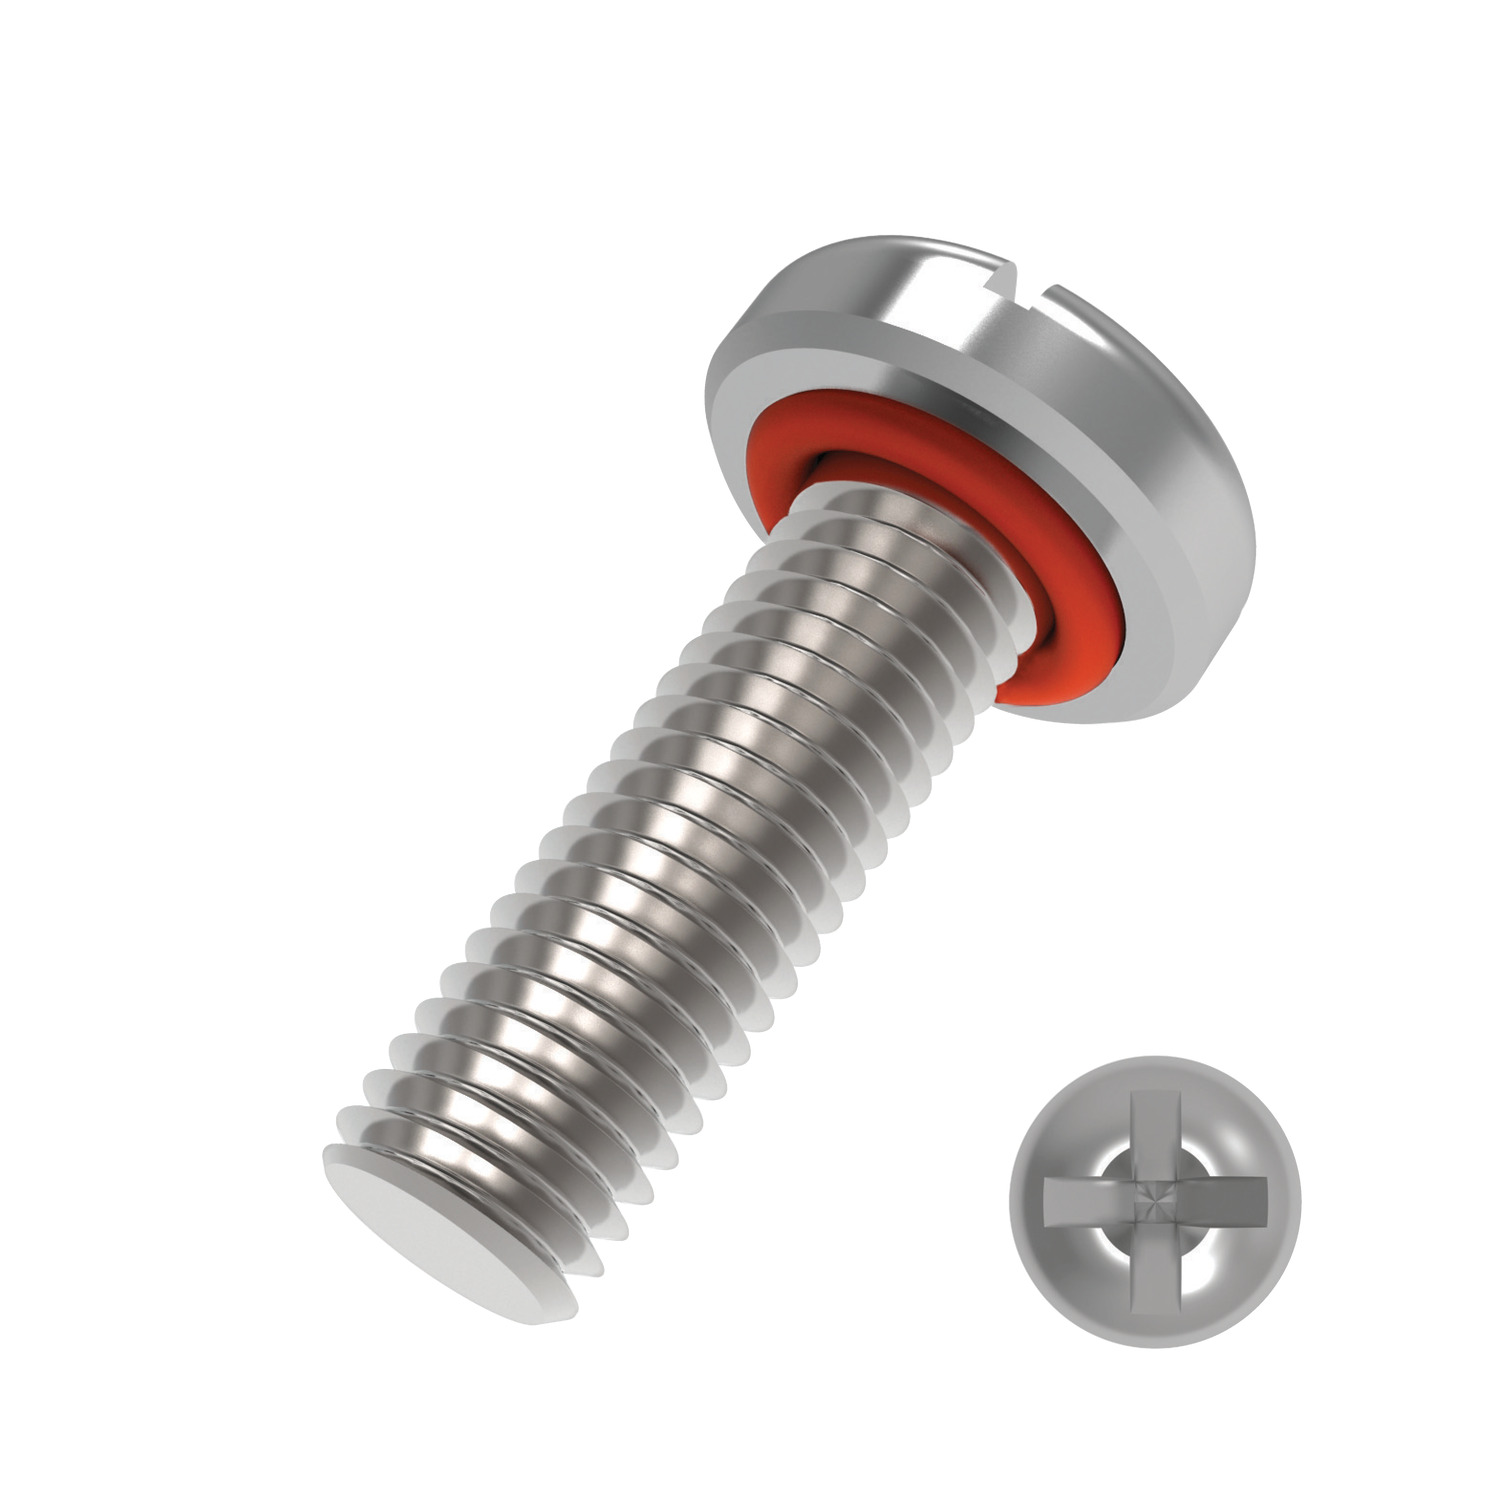 Pan Head Seal Screws Pan head seal screws are manufactured to DIN 7985